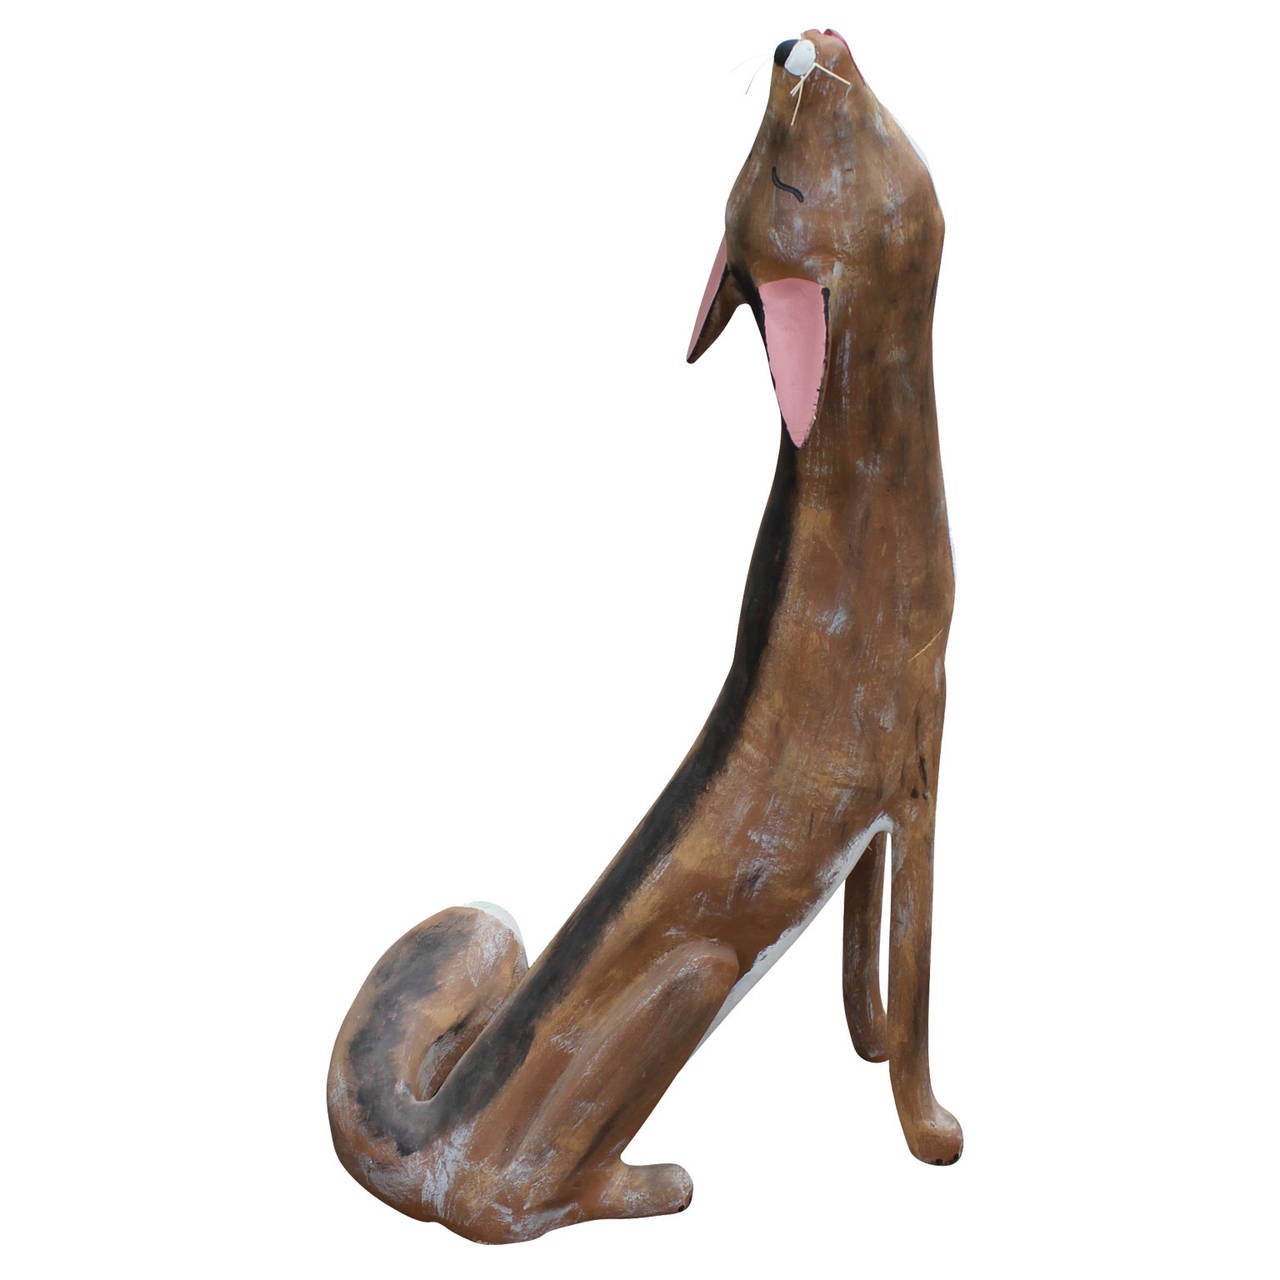 Howling coyote or fox sculpture by artist David Alvarez. Sculpture is hand carved wood and painted.